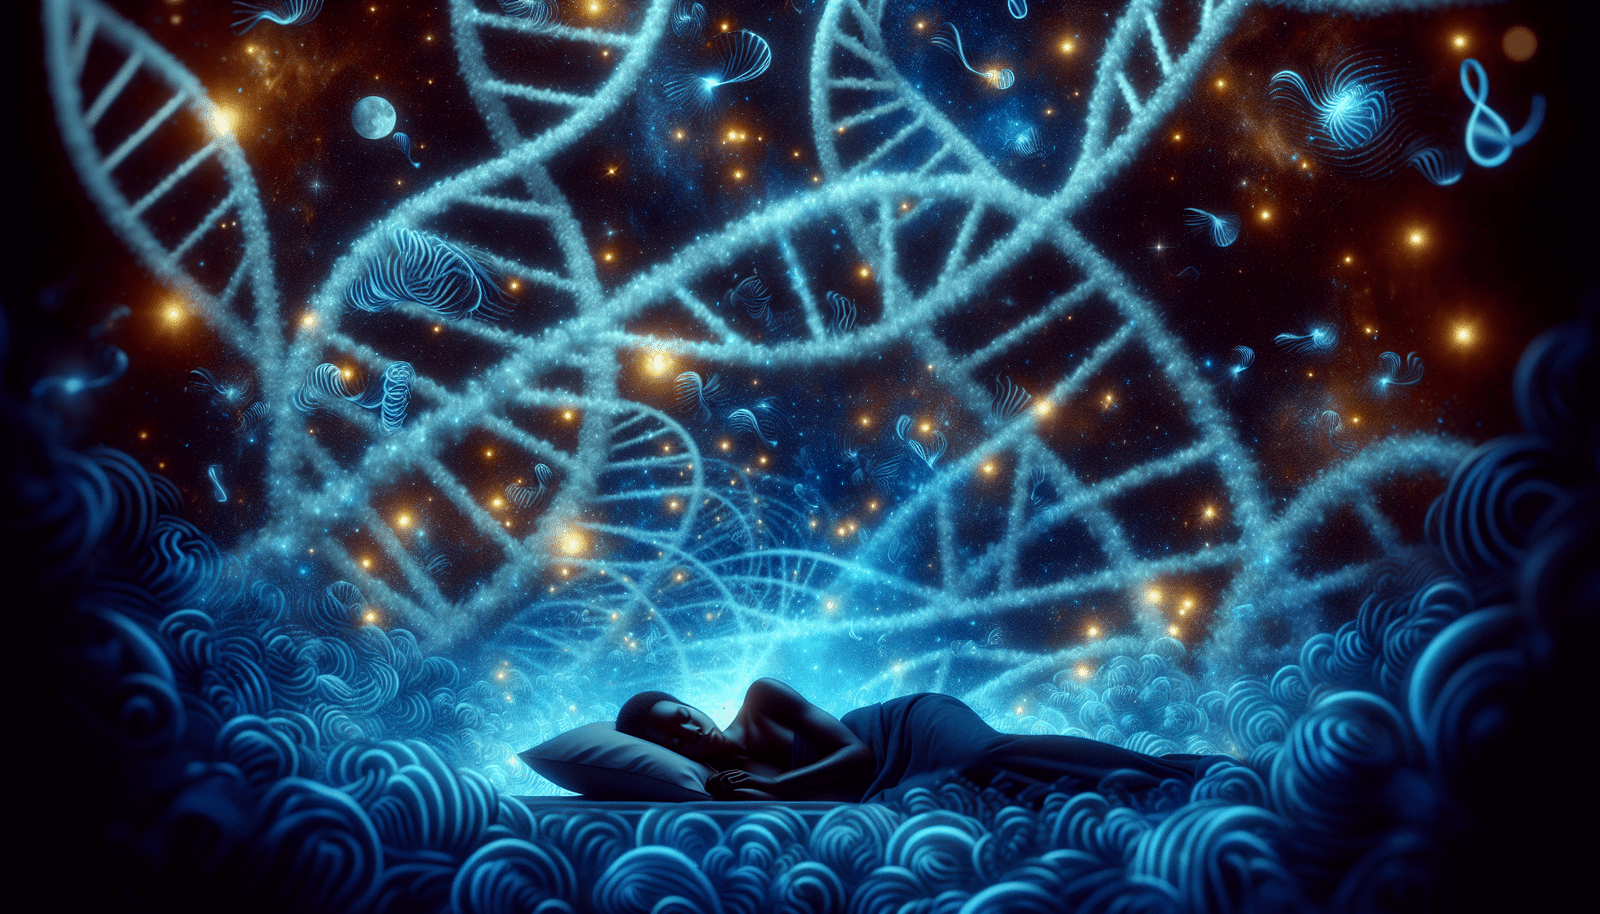 What Is The Role Of Genetics In Sleep Patterns?